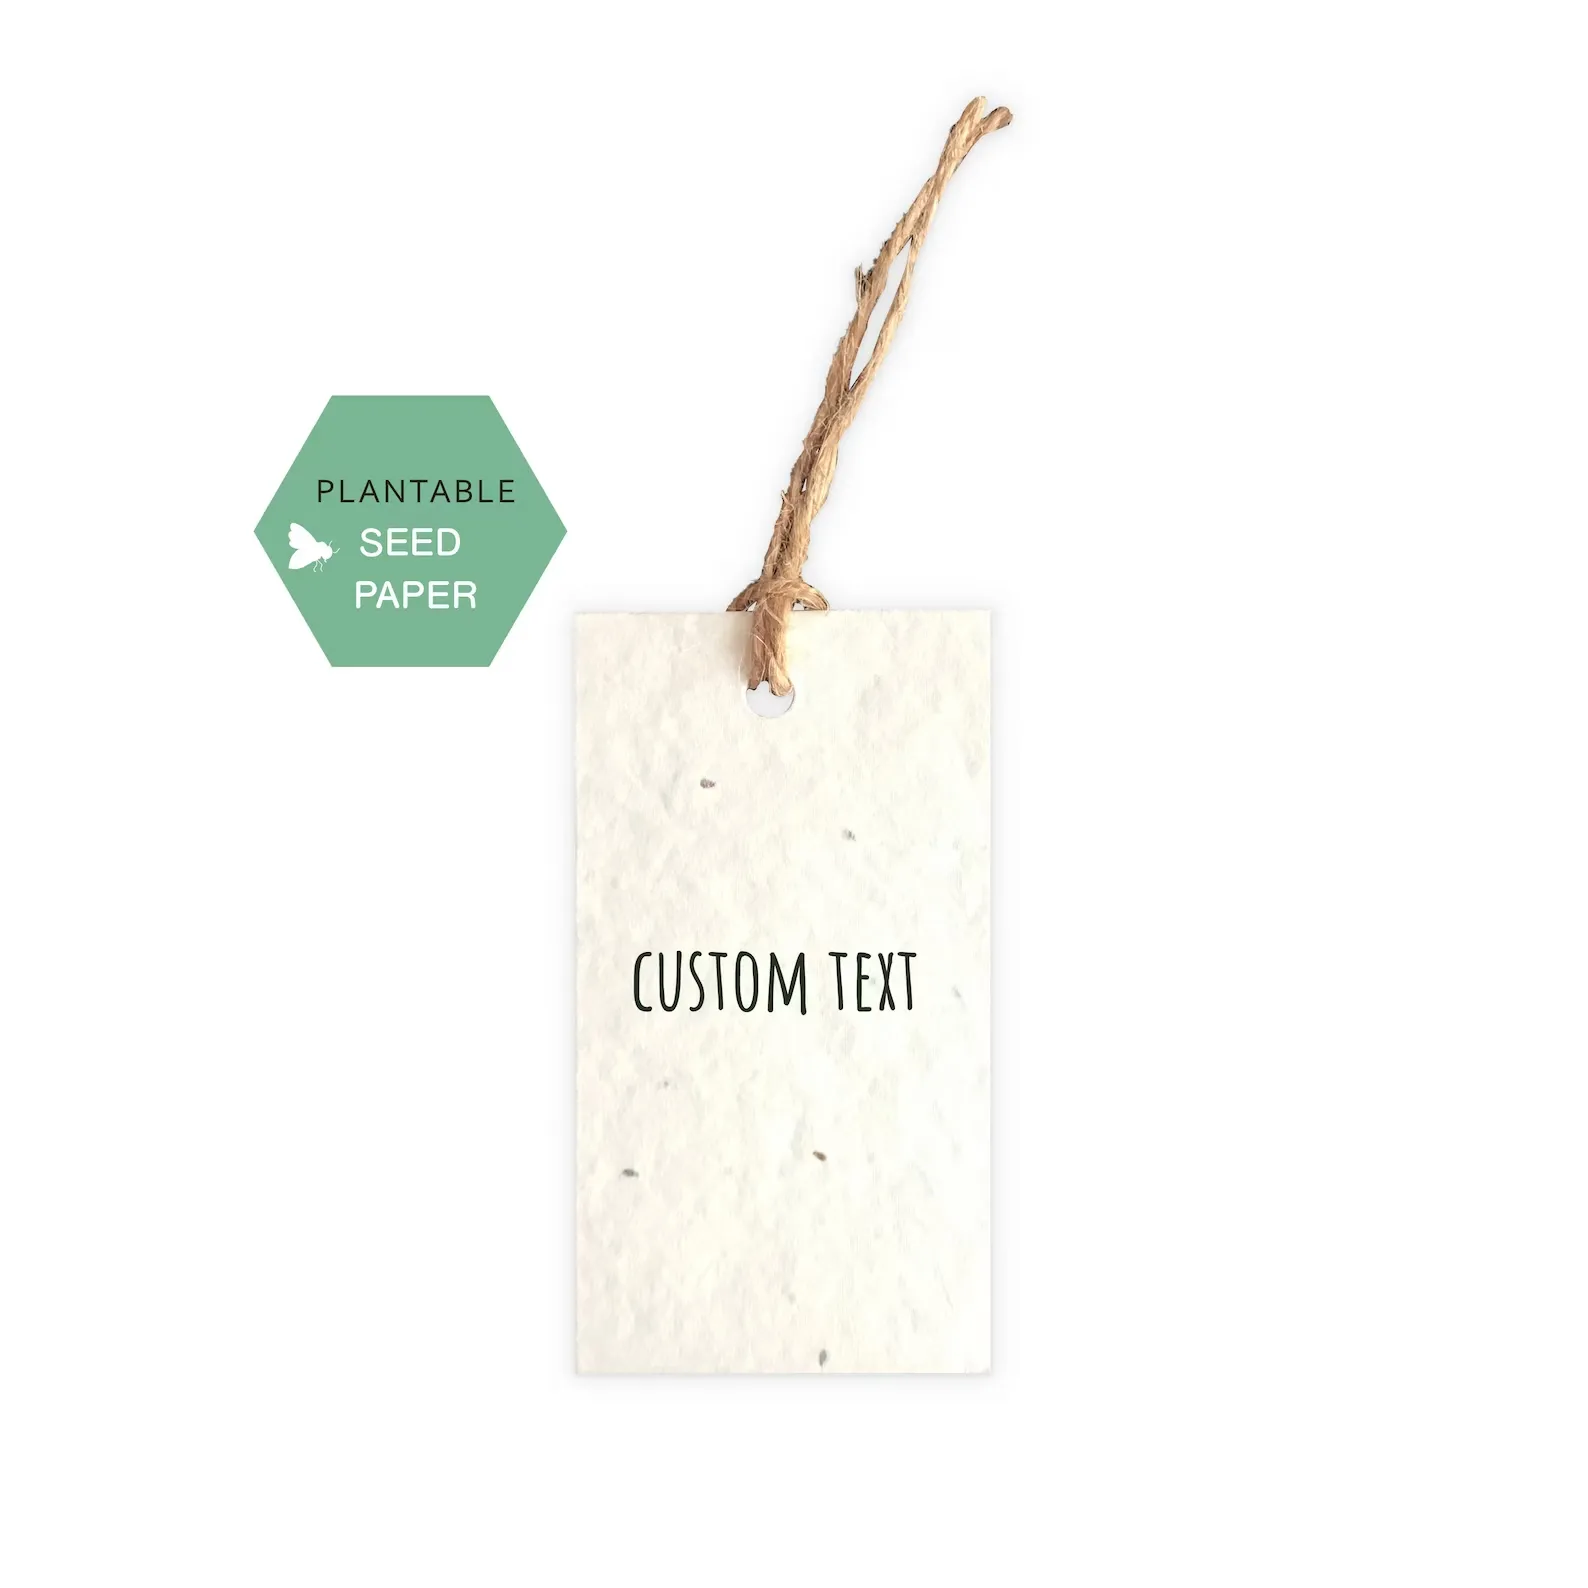 Promotional and Corporate Events Sow and Grow Plantable Recycled Paper Tags for Clothing and Gift Tagging Options